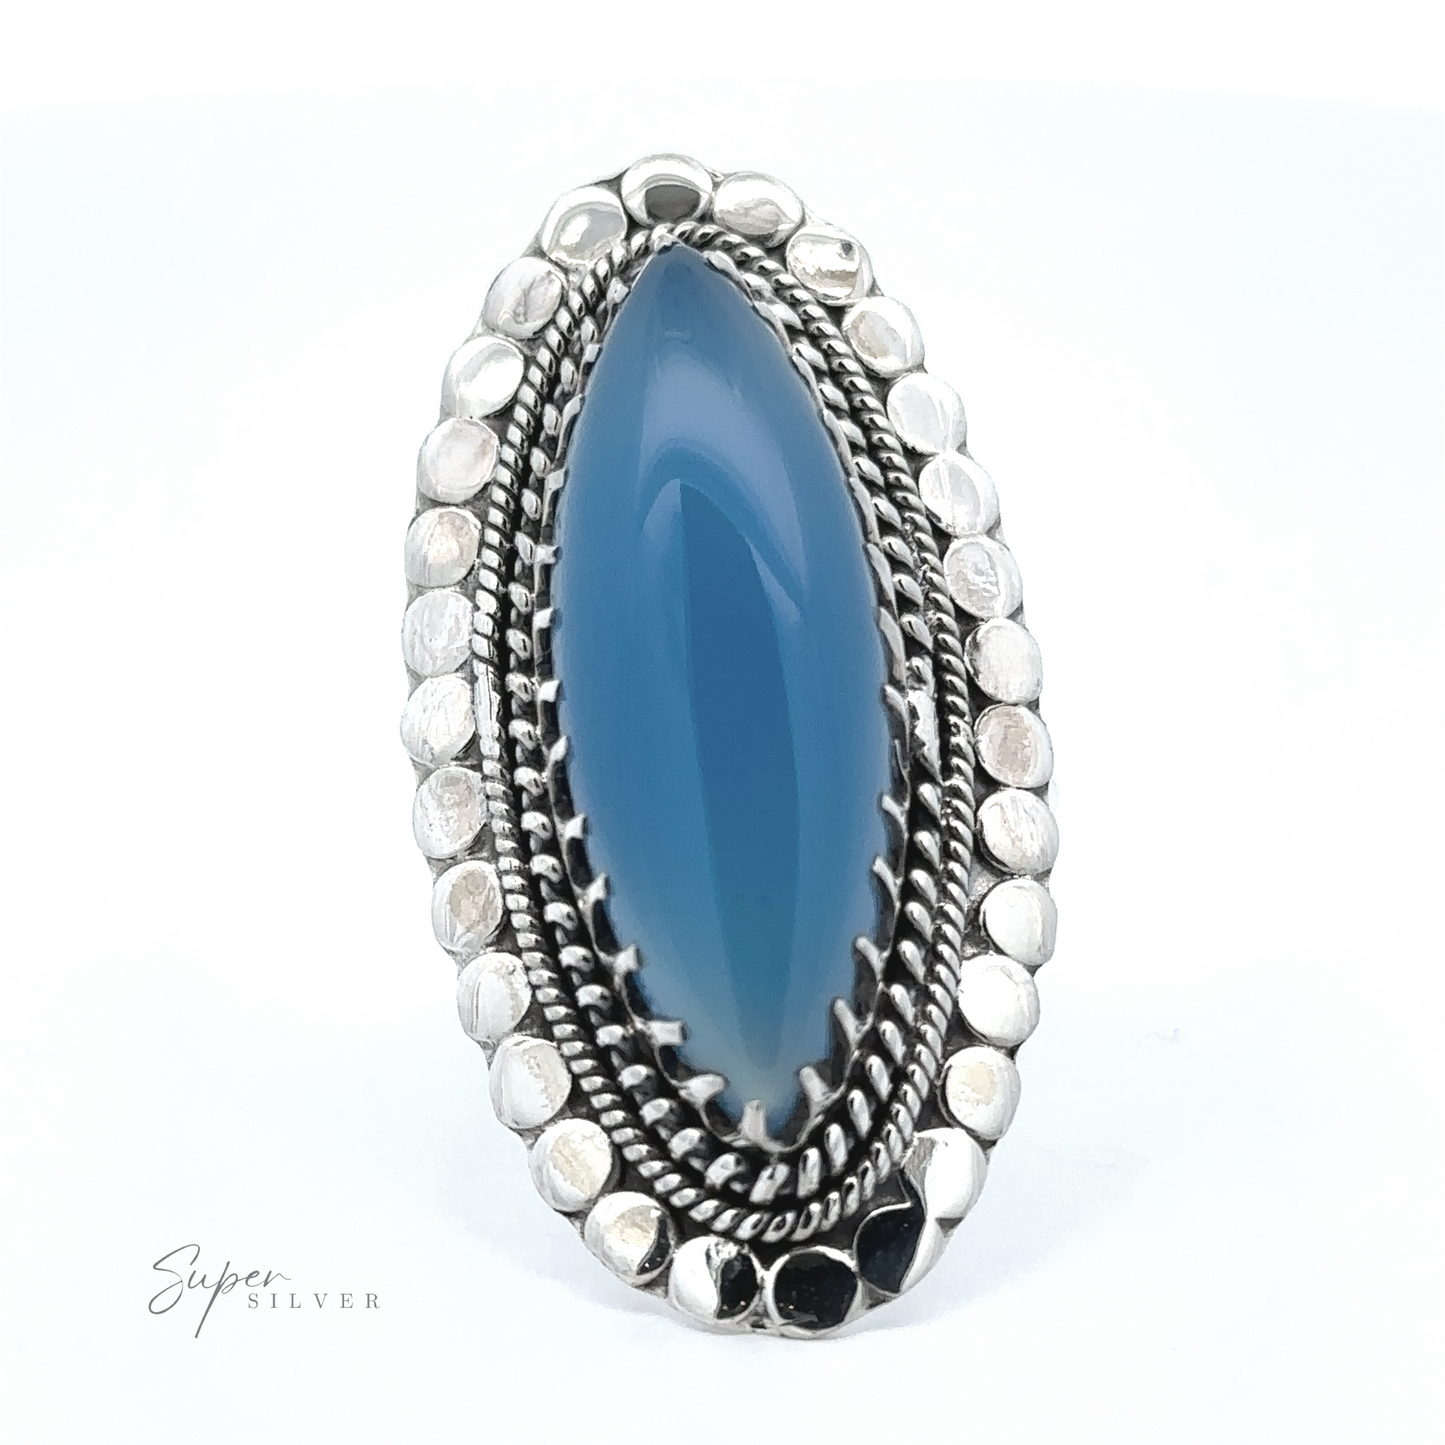 
                  
                    A **Statement Marquise Shaped Gemstone Ring** with a marquise-shaped blue gemstone set in the center, surrounded by intricate silver detailing, offering a touch of bohemian jewelry elegance.
                  
                